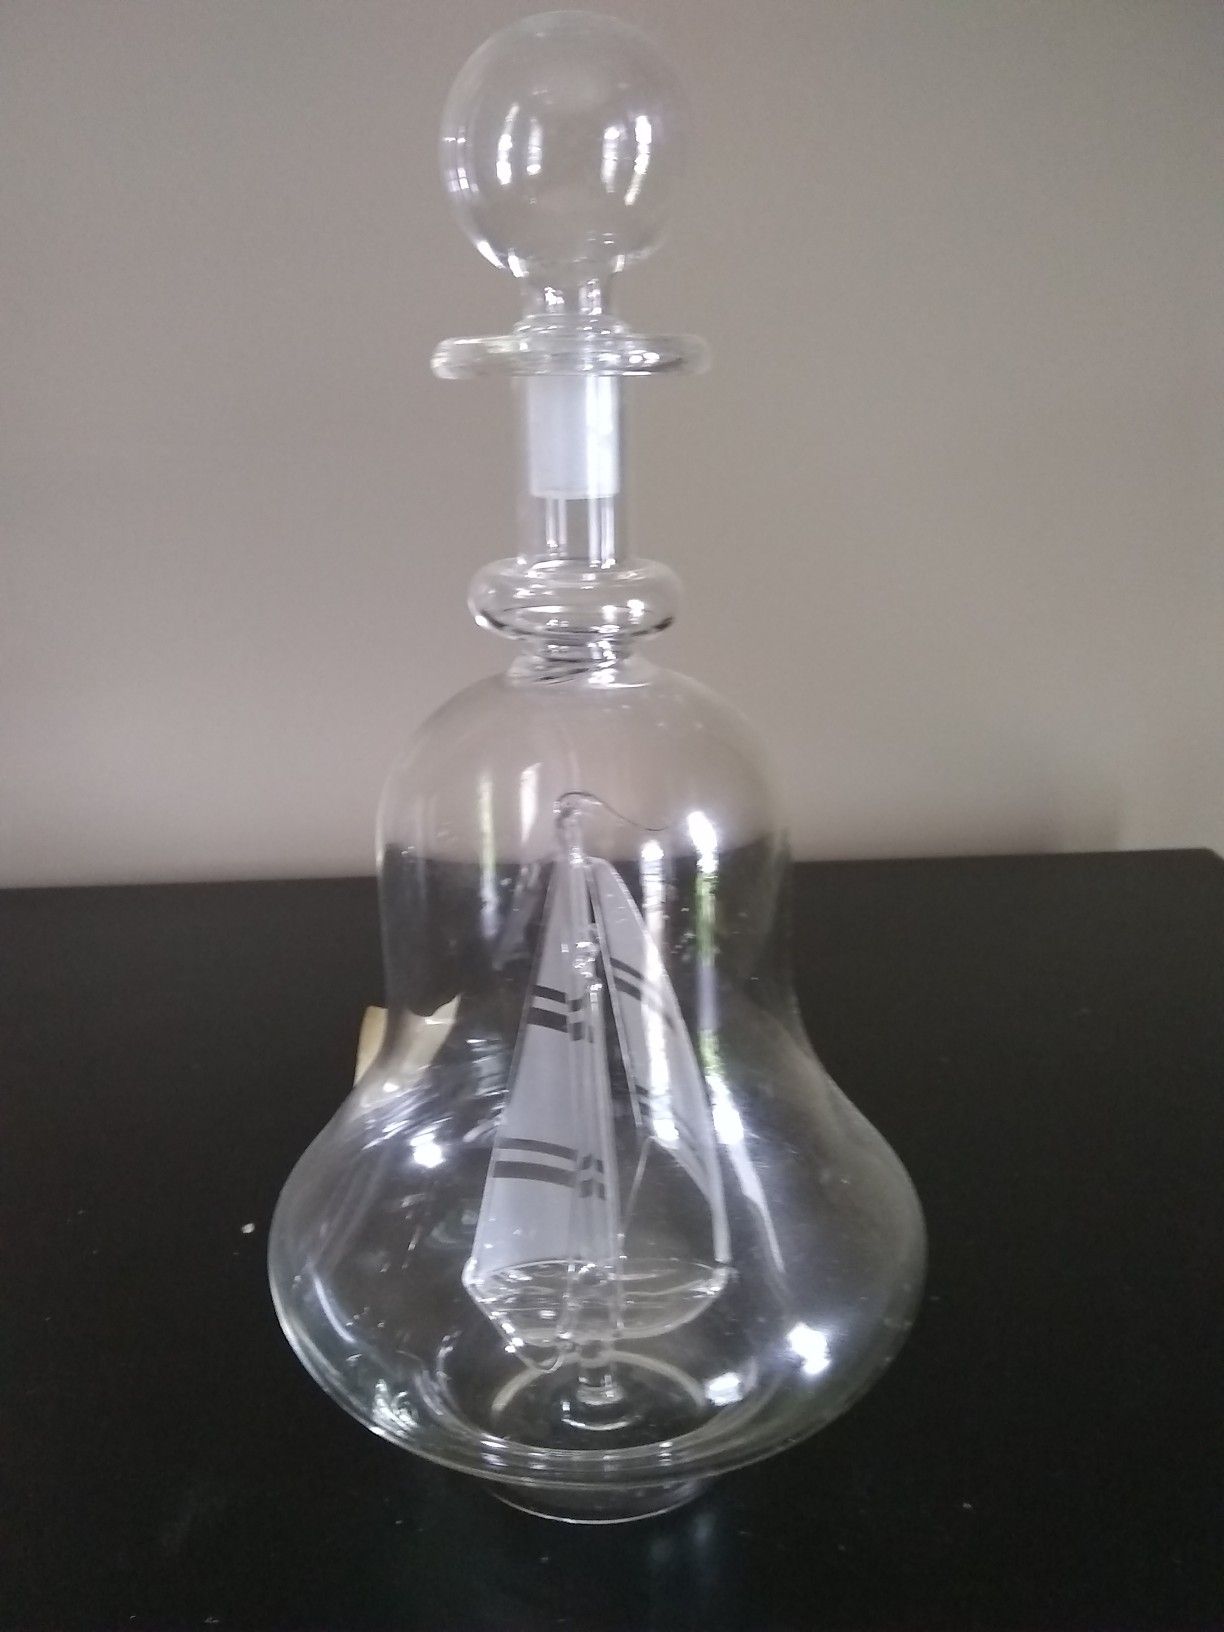 Glass sailboat in a bottle